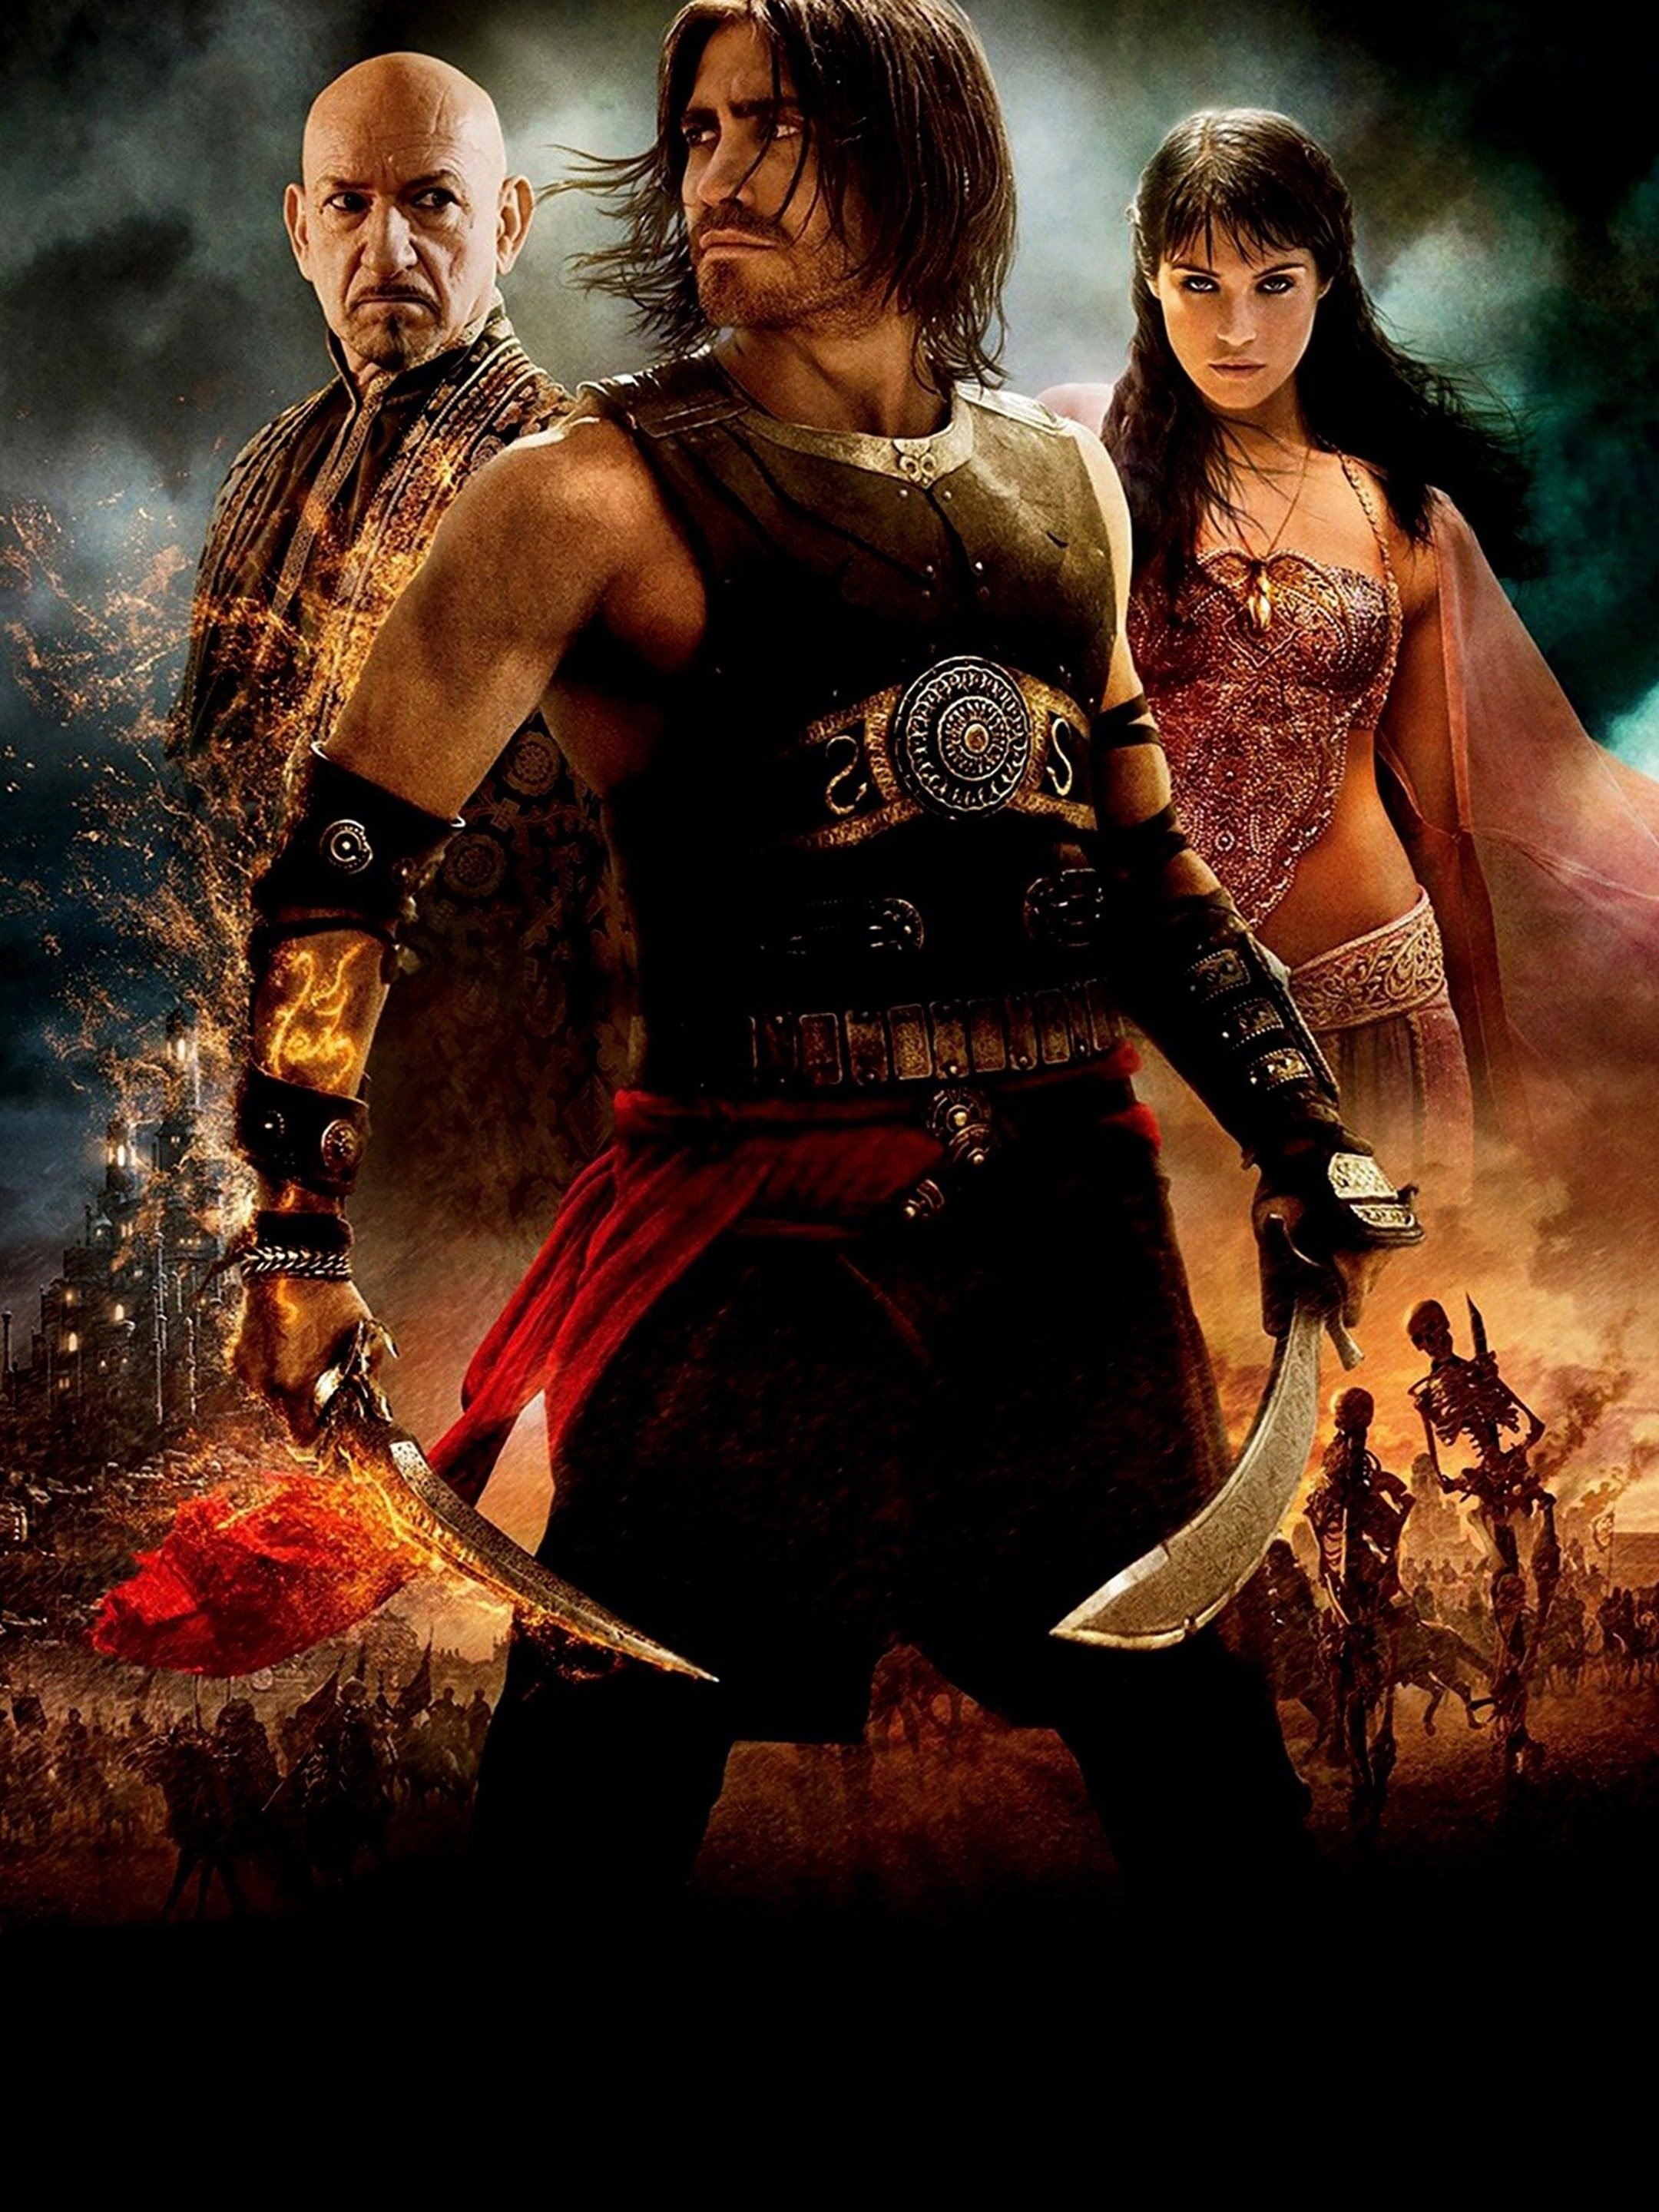 Prince of Persia: The Forgotten Sands (Video Game 2010) - IMDb